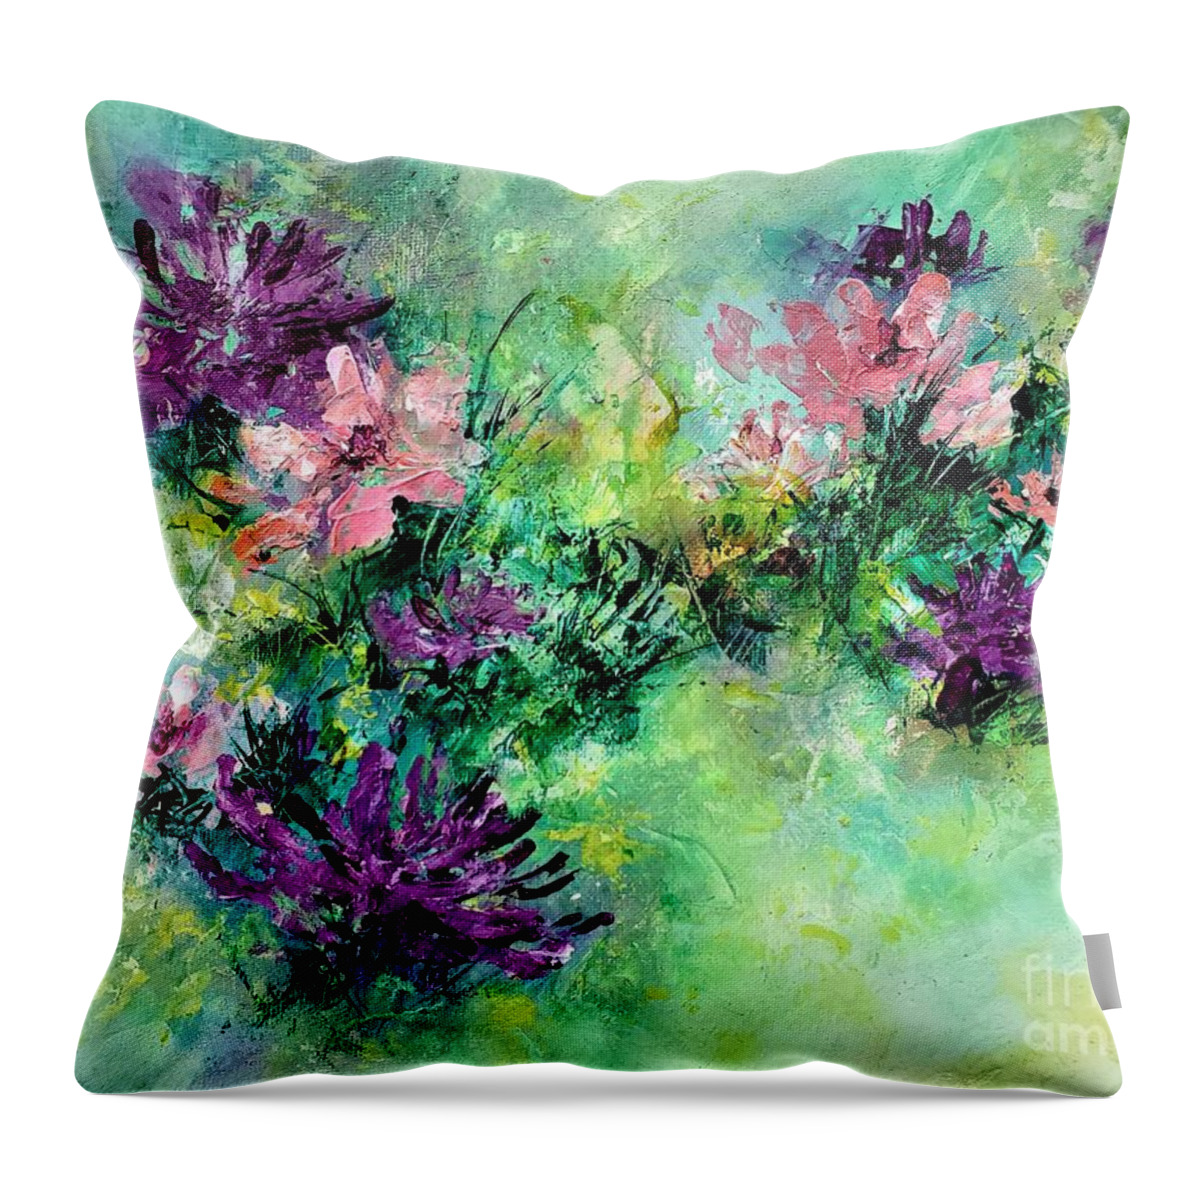 Floral Throw Pillow featuring the painting Floral Melody by Zan Savage